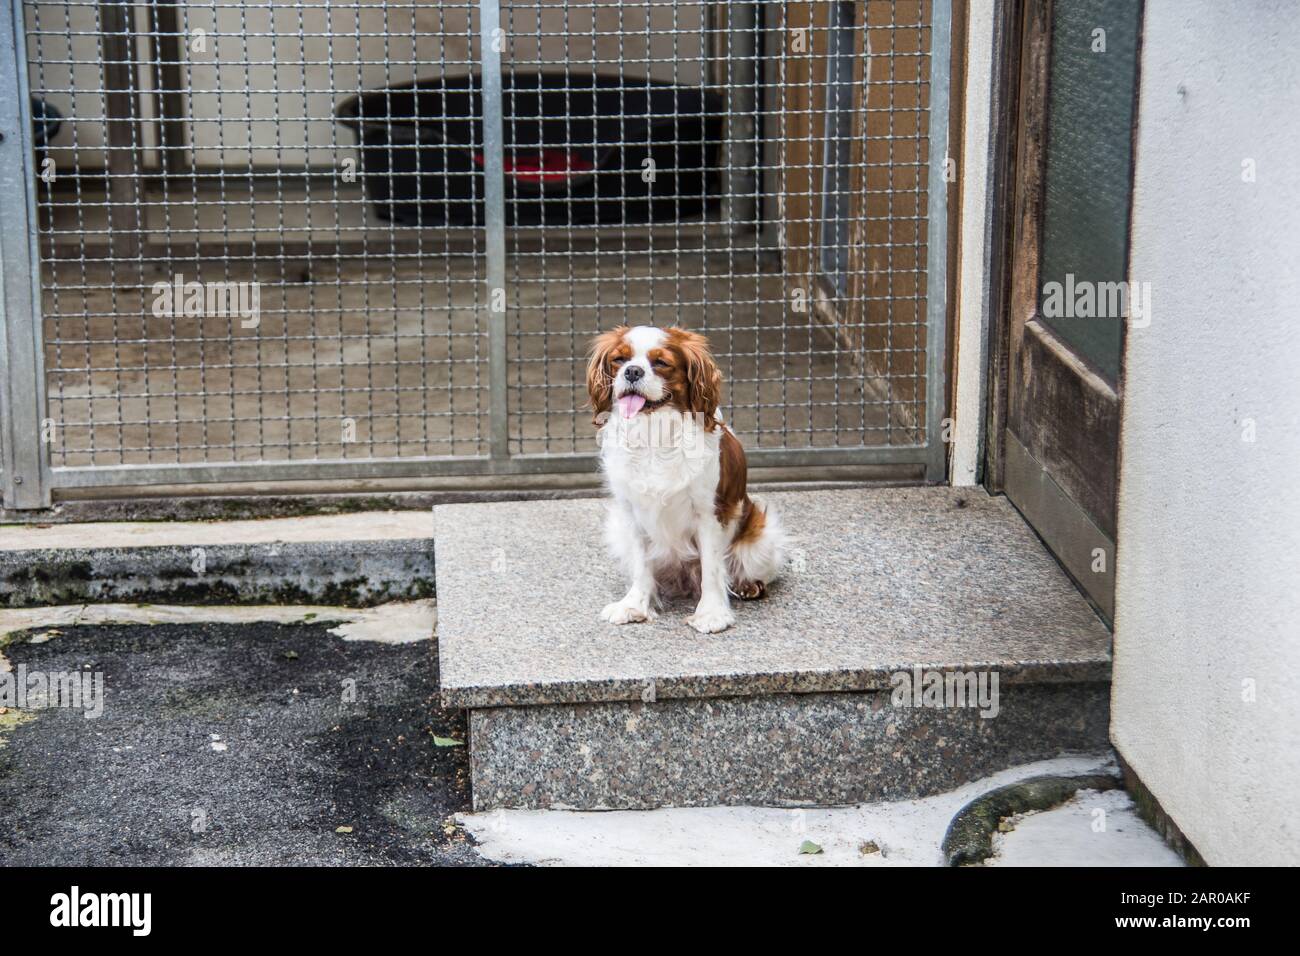 brown white pied dog in front of kennel Stock Photo